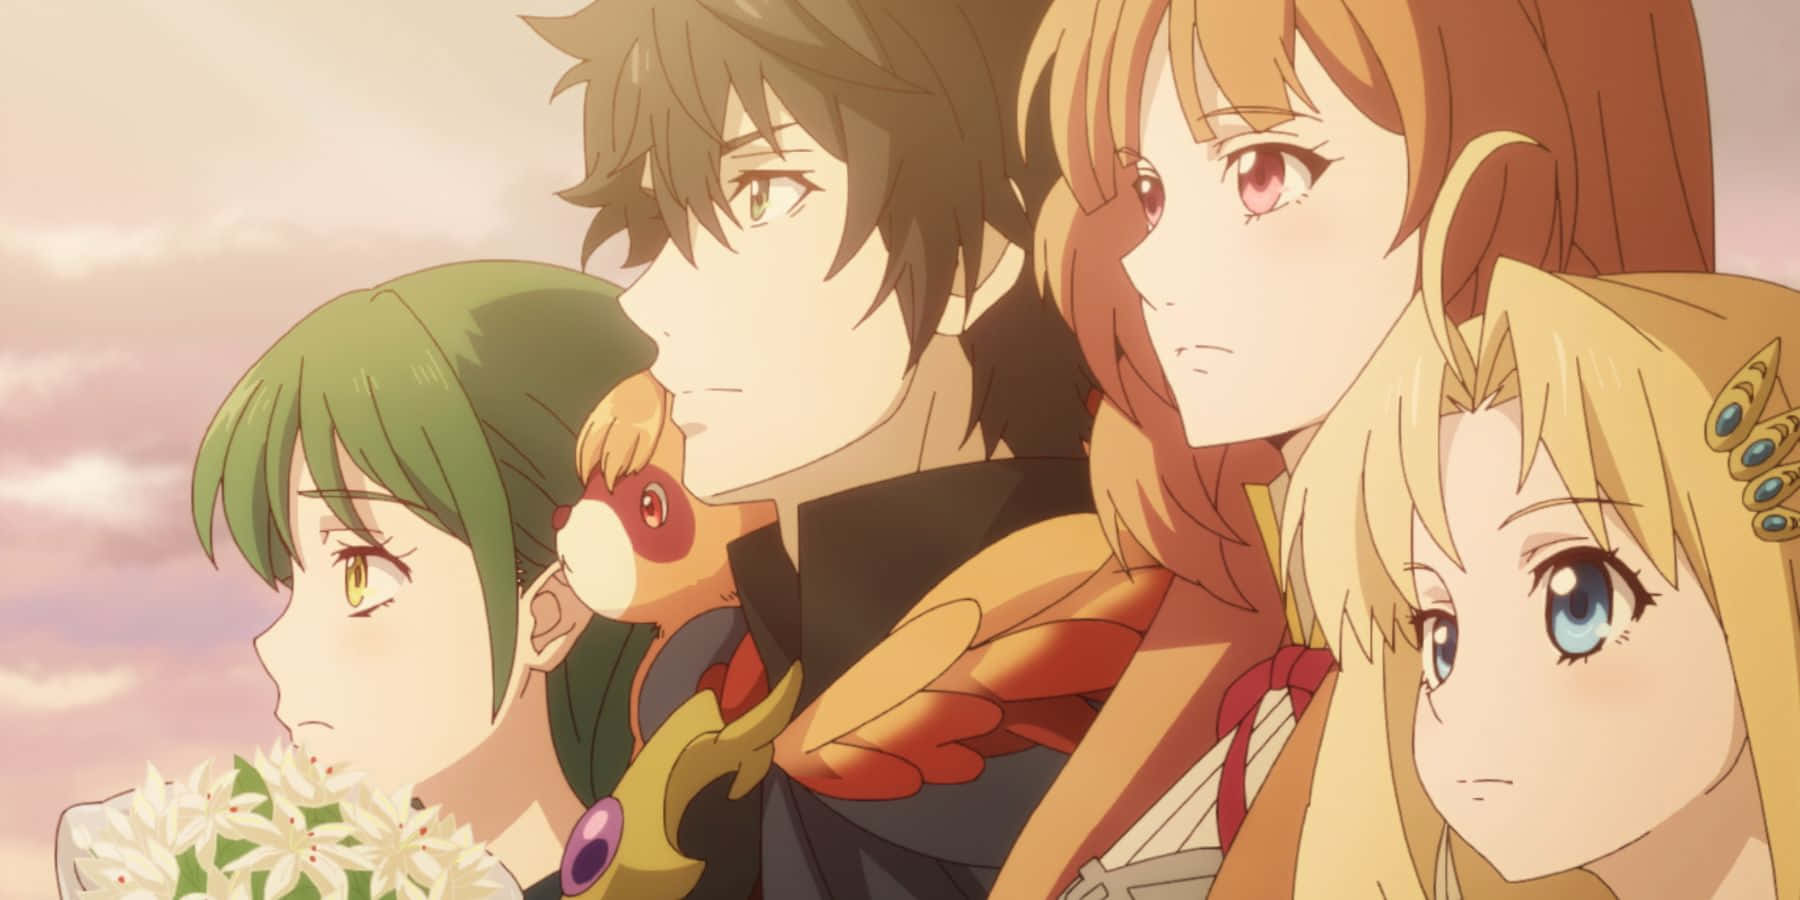 Embrace your destiny with Naofumi and the other heroes of the Shield Hero series